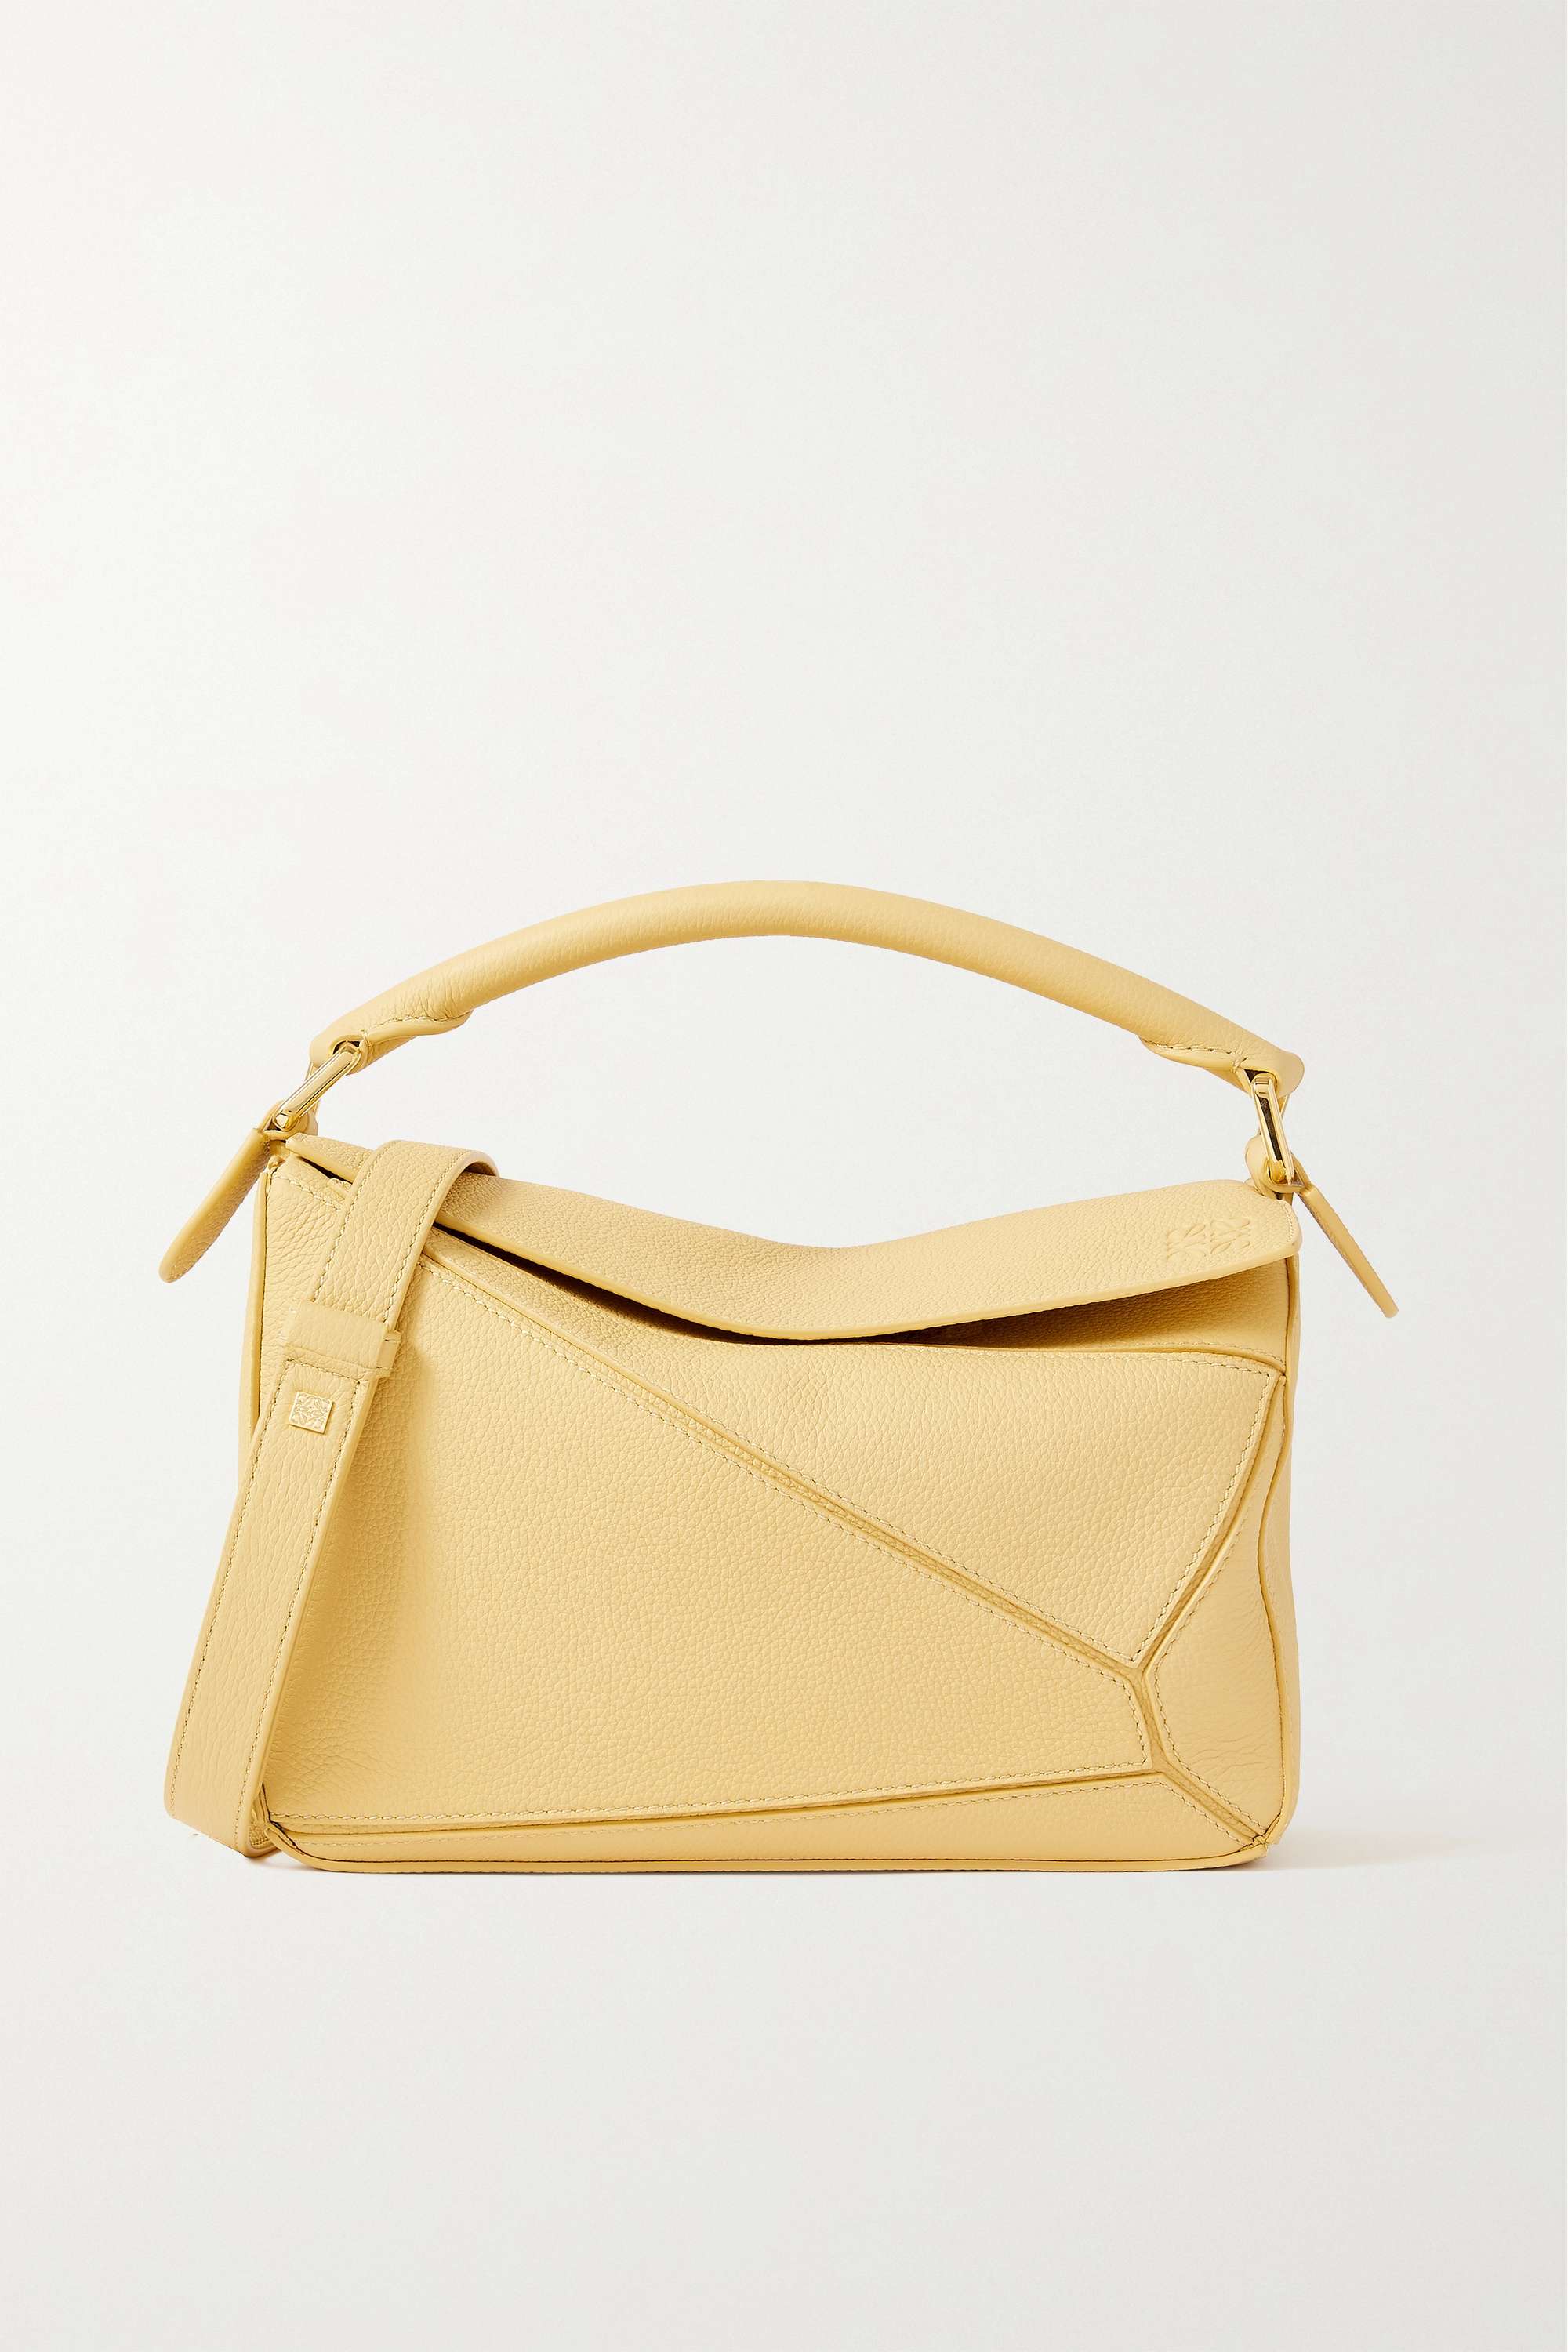 Loewe + Puzzle small textured-leather shoulder bag